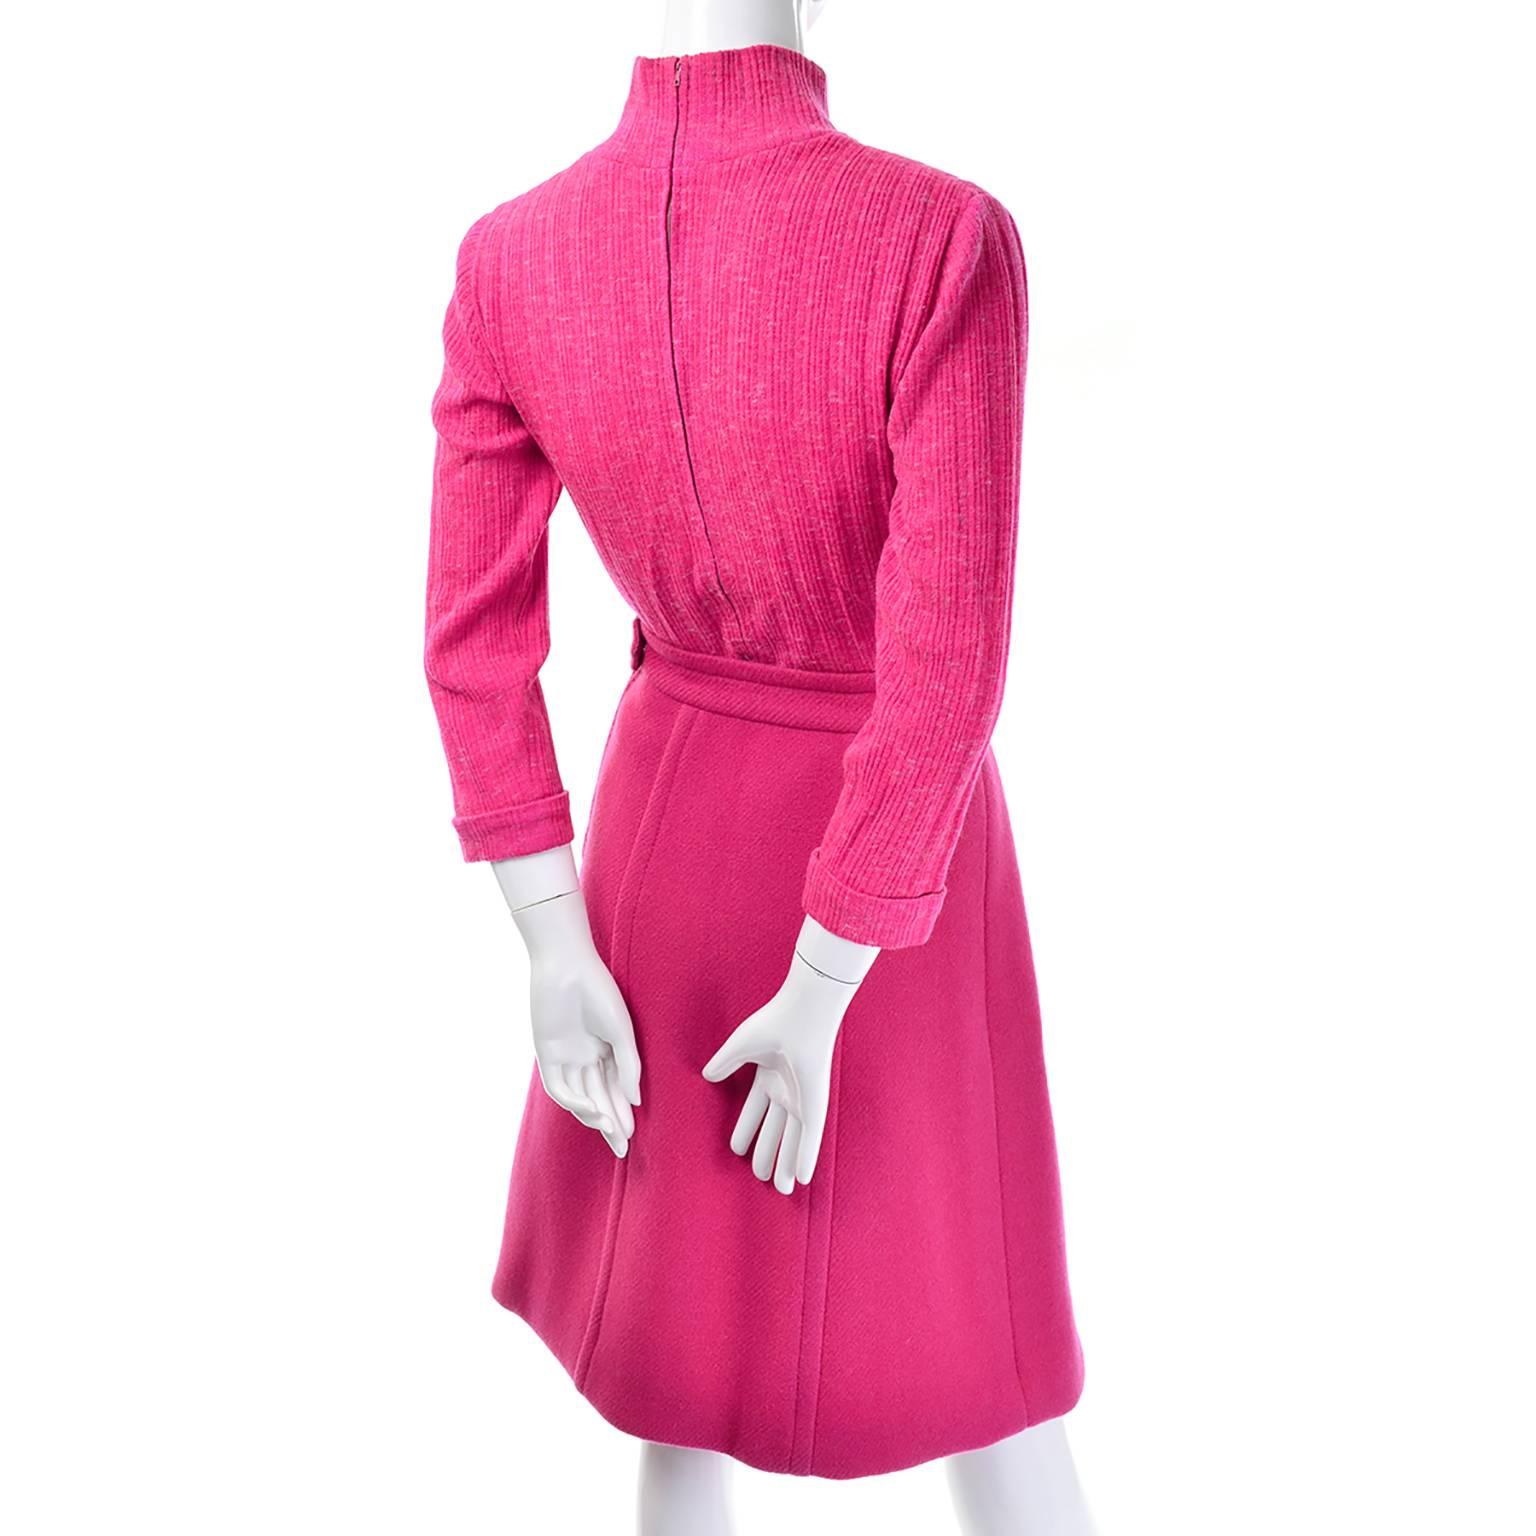 1960s Via Tornabuoni Florence Italy Pink Vintage Coat Suit Skirt Top C Ciani 3